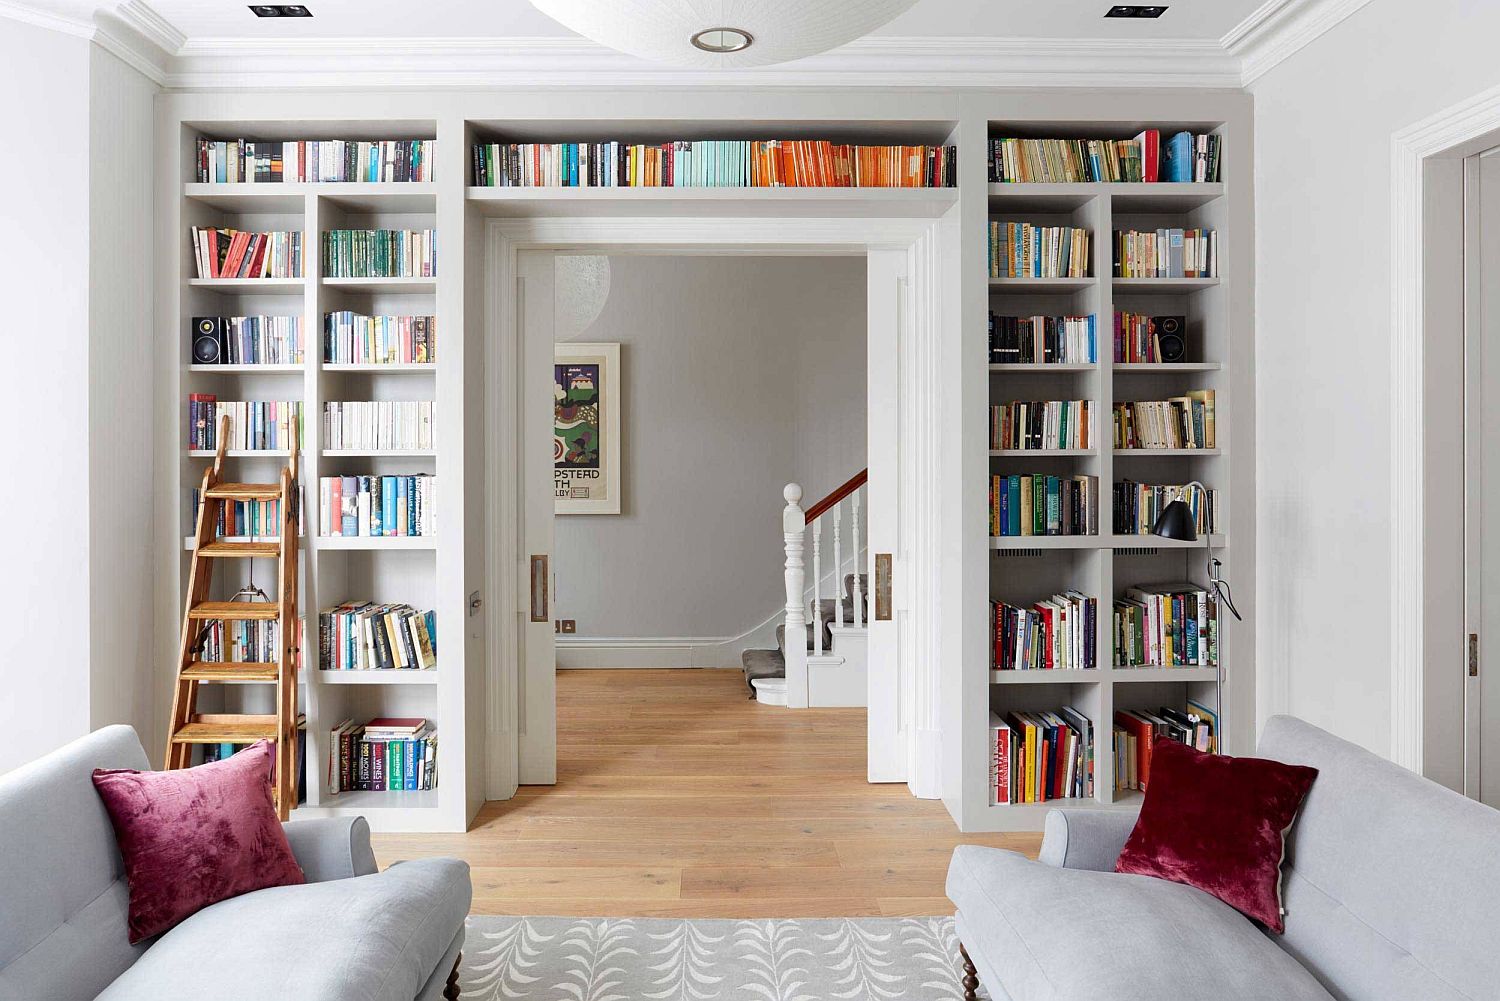 Bookshelf that wraps itself around the doorway helps create a lovely wall of books in the living room with ample natural light